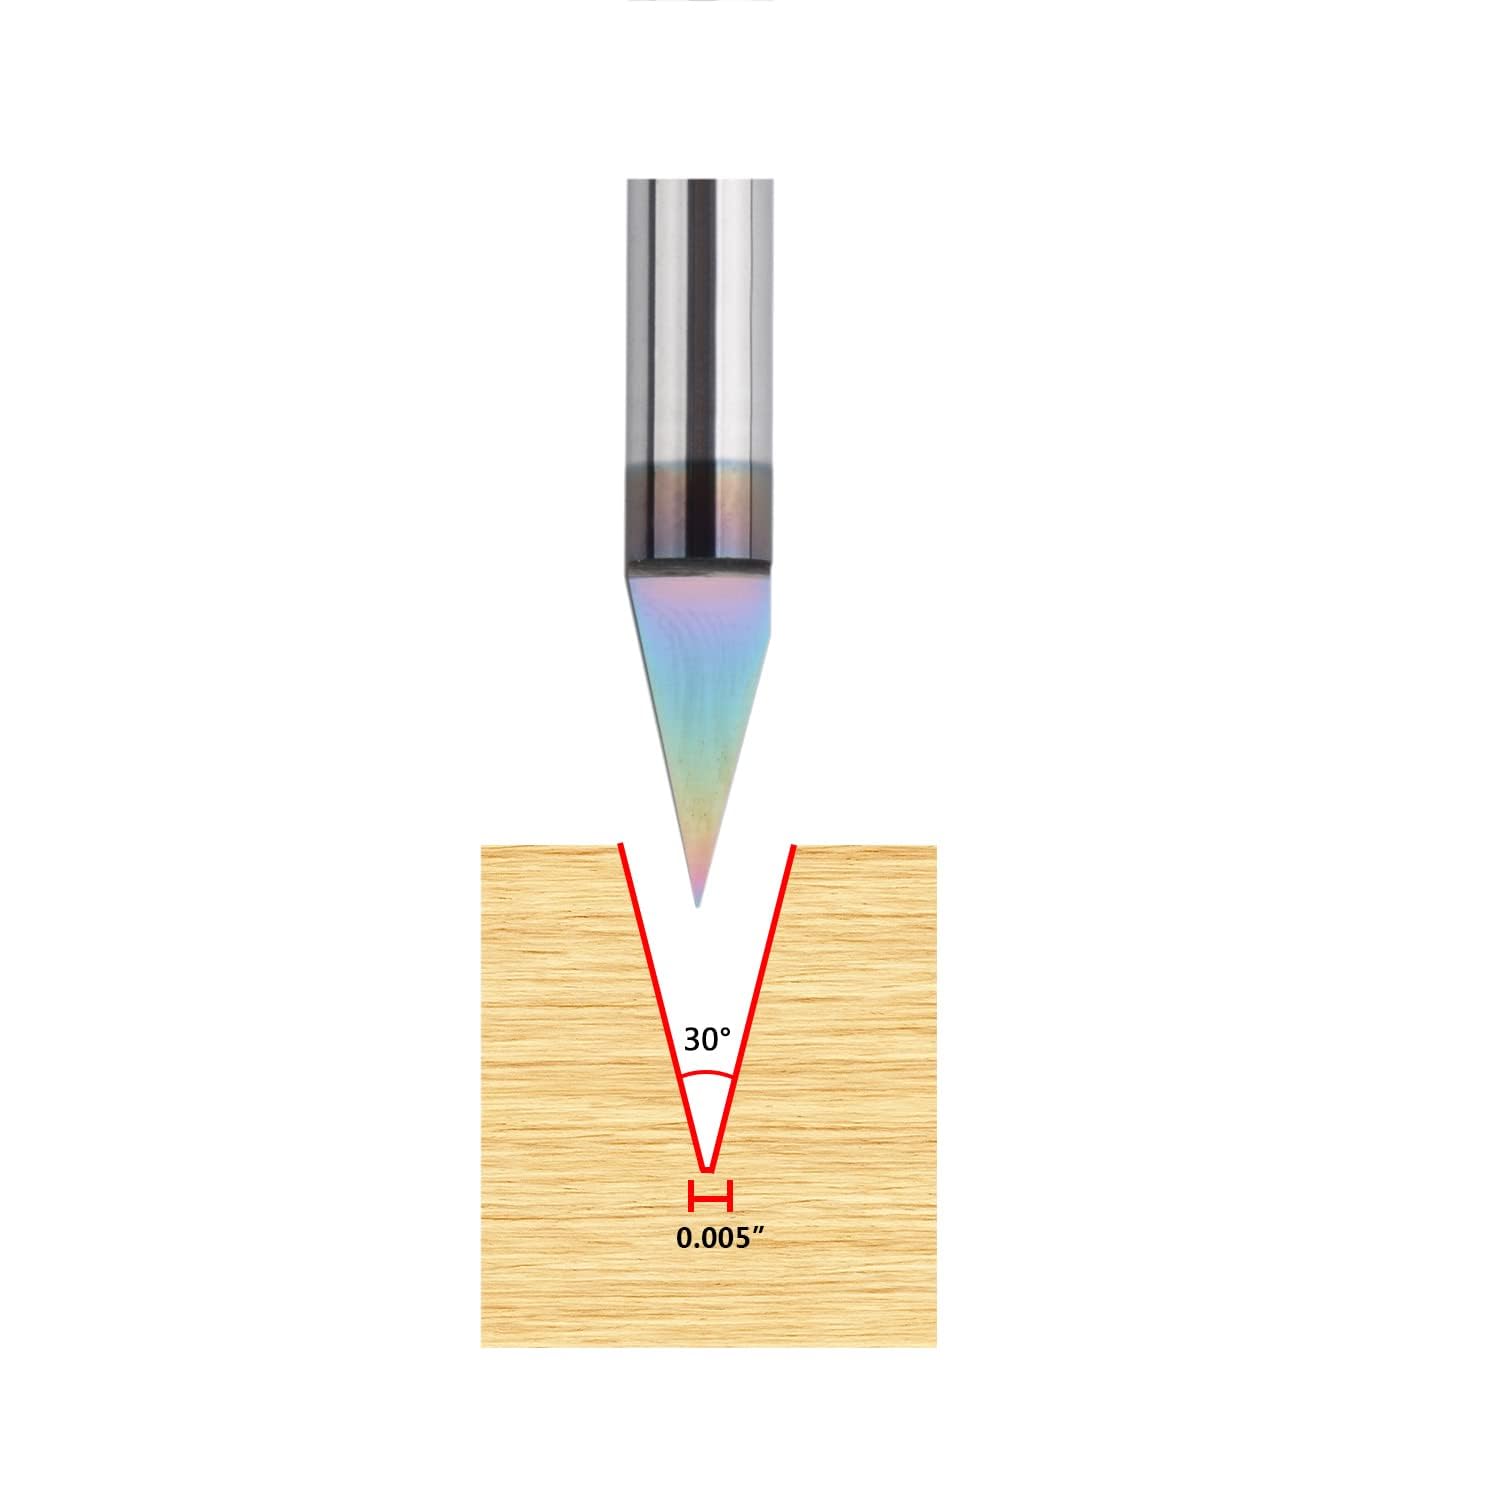 SpeTool V Groove Router Bit Engraving Bit 30 Degree CNC V Bits Solid Carbide V Endmill 0.005 inches Tip 1/4 inches Shank with TAC Coating Extra Life for Wood Lettering Carving